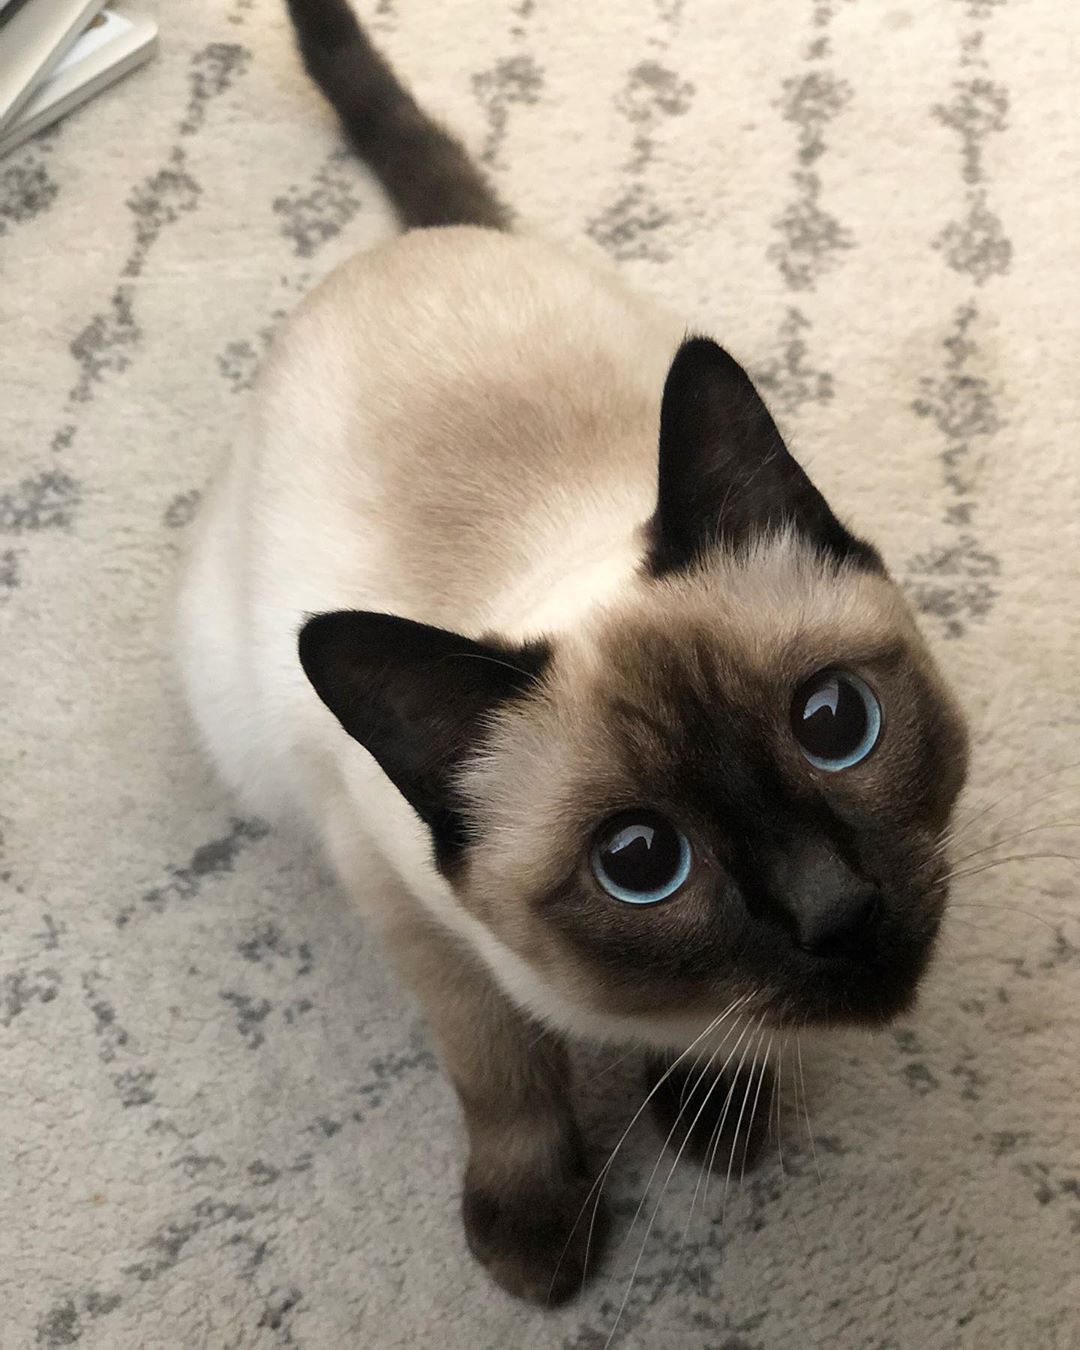 Baby Siamese Cat For Adoption